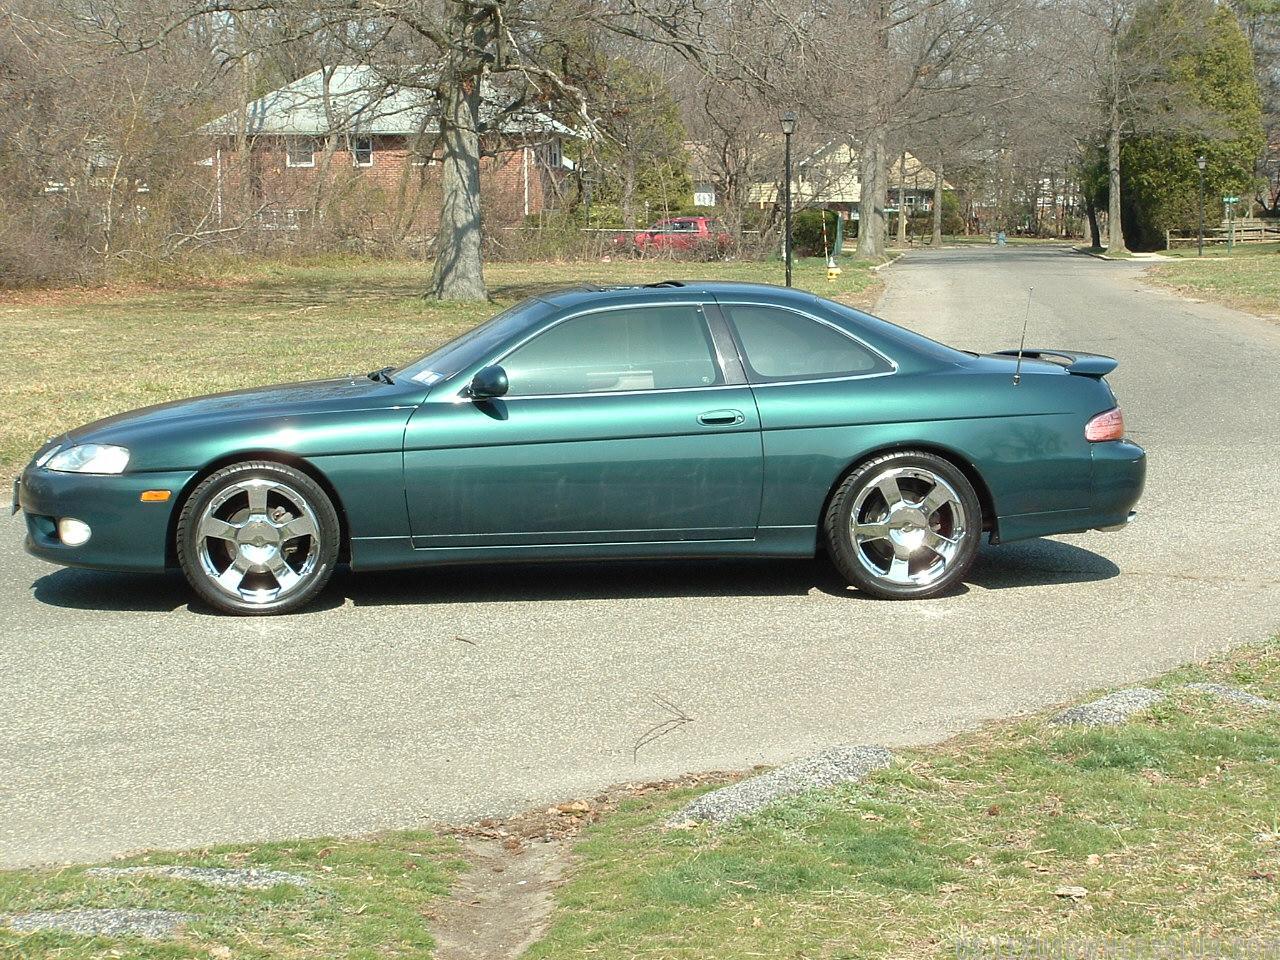 Looking clean and mean in the sun '03.JPG